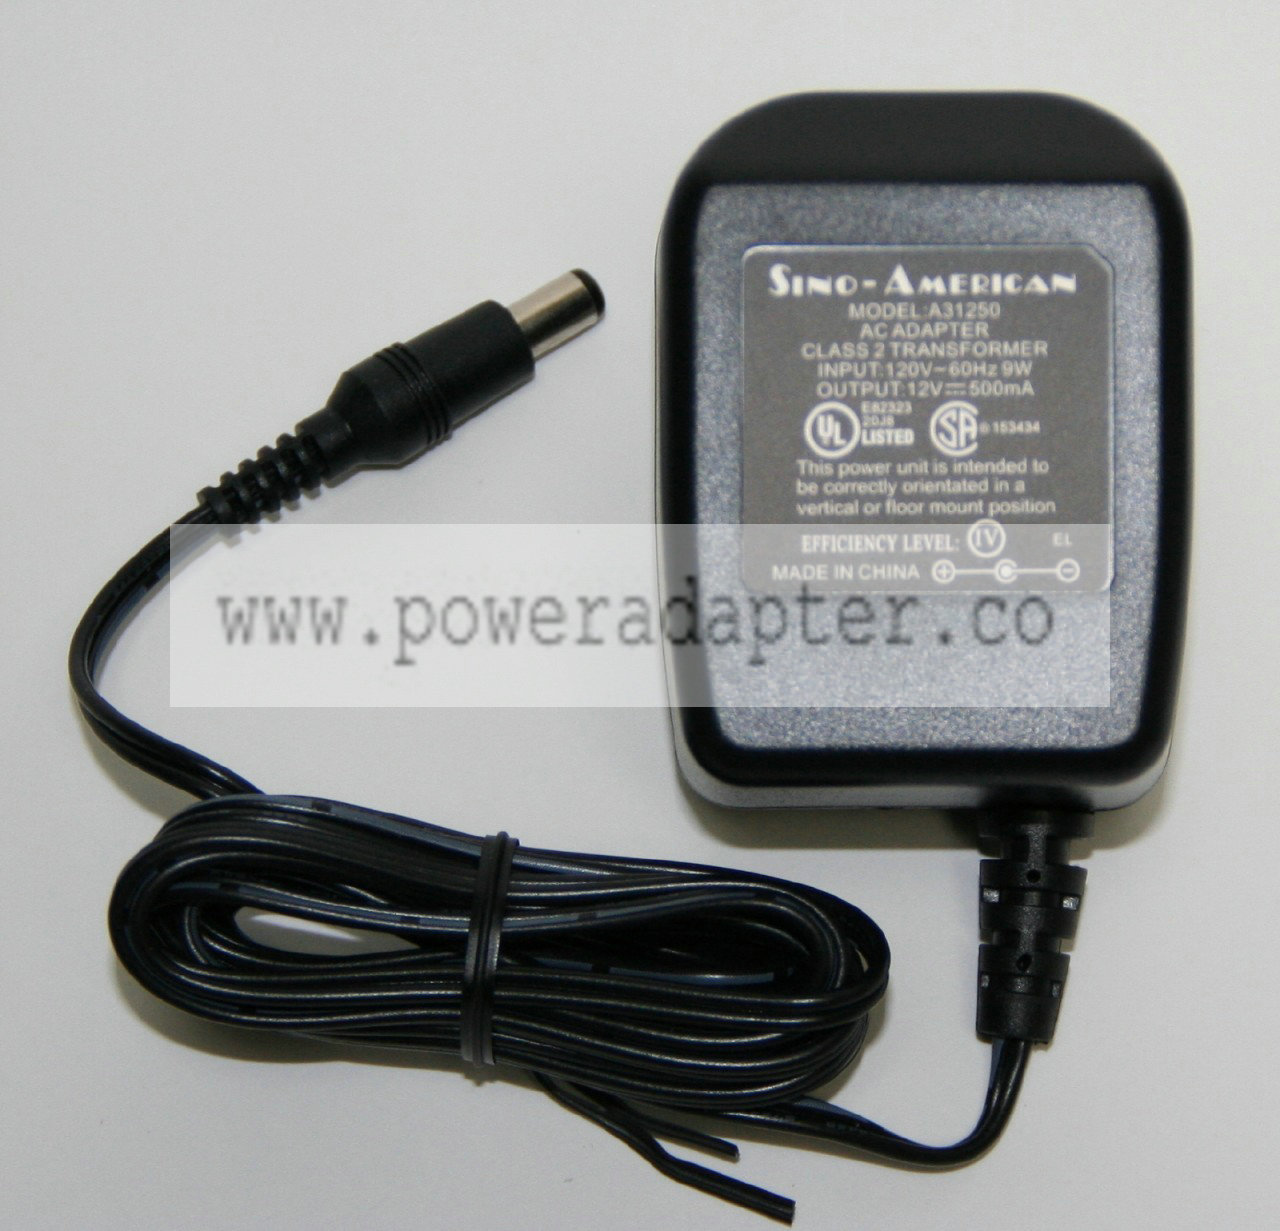 Akai MP12-1 AC Adaptor for MPC500 (included w/ MPC500 purchase)) input:AC 120v 60hz output:12v 500ma